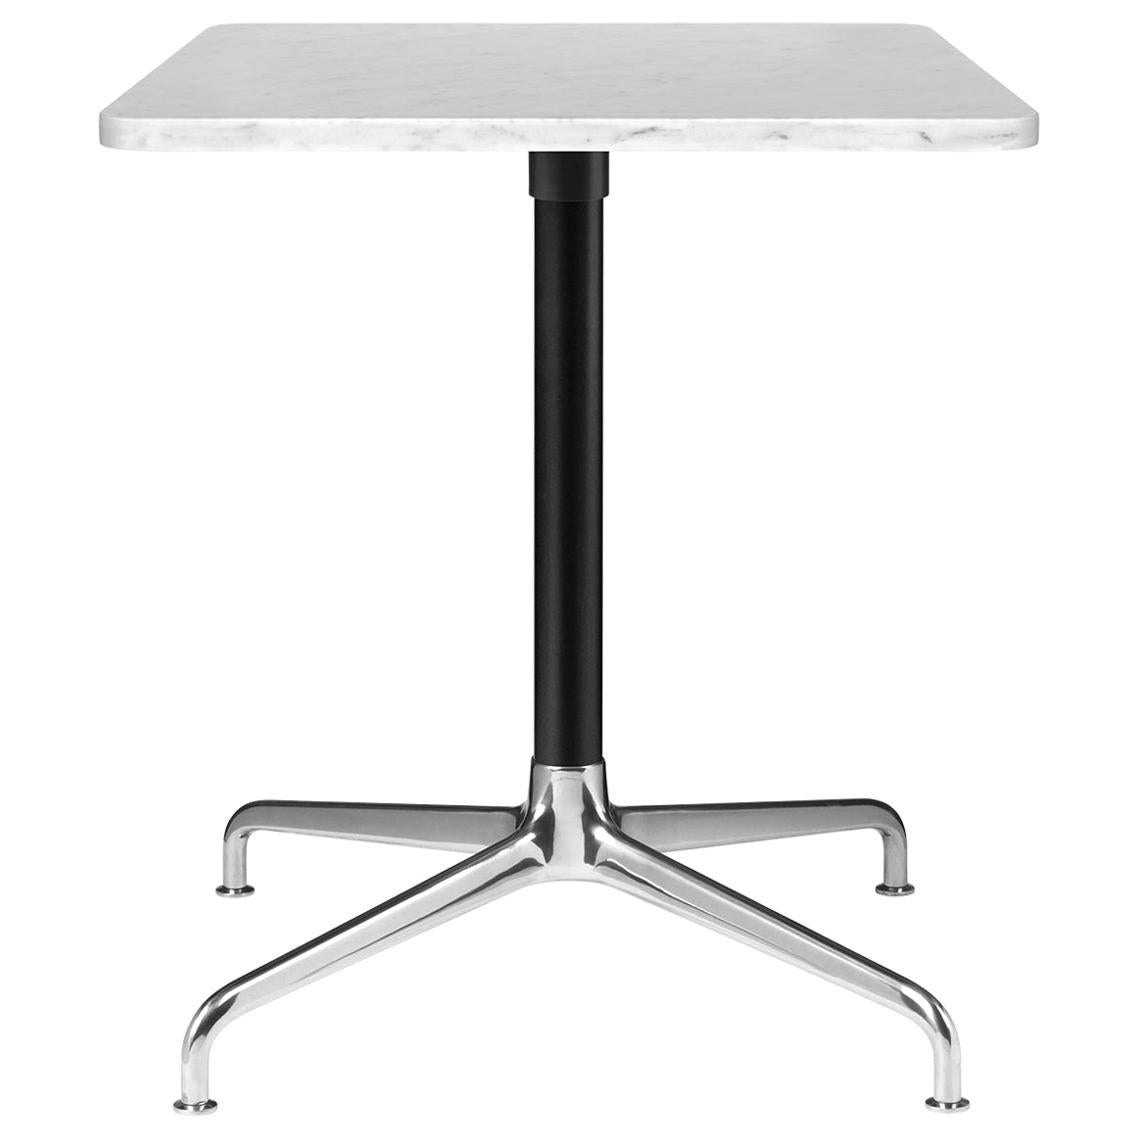 Beetle Lounge Table, Square, 4 Star Base, Large, Laminate For Sale